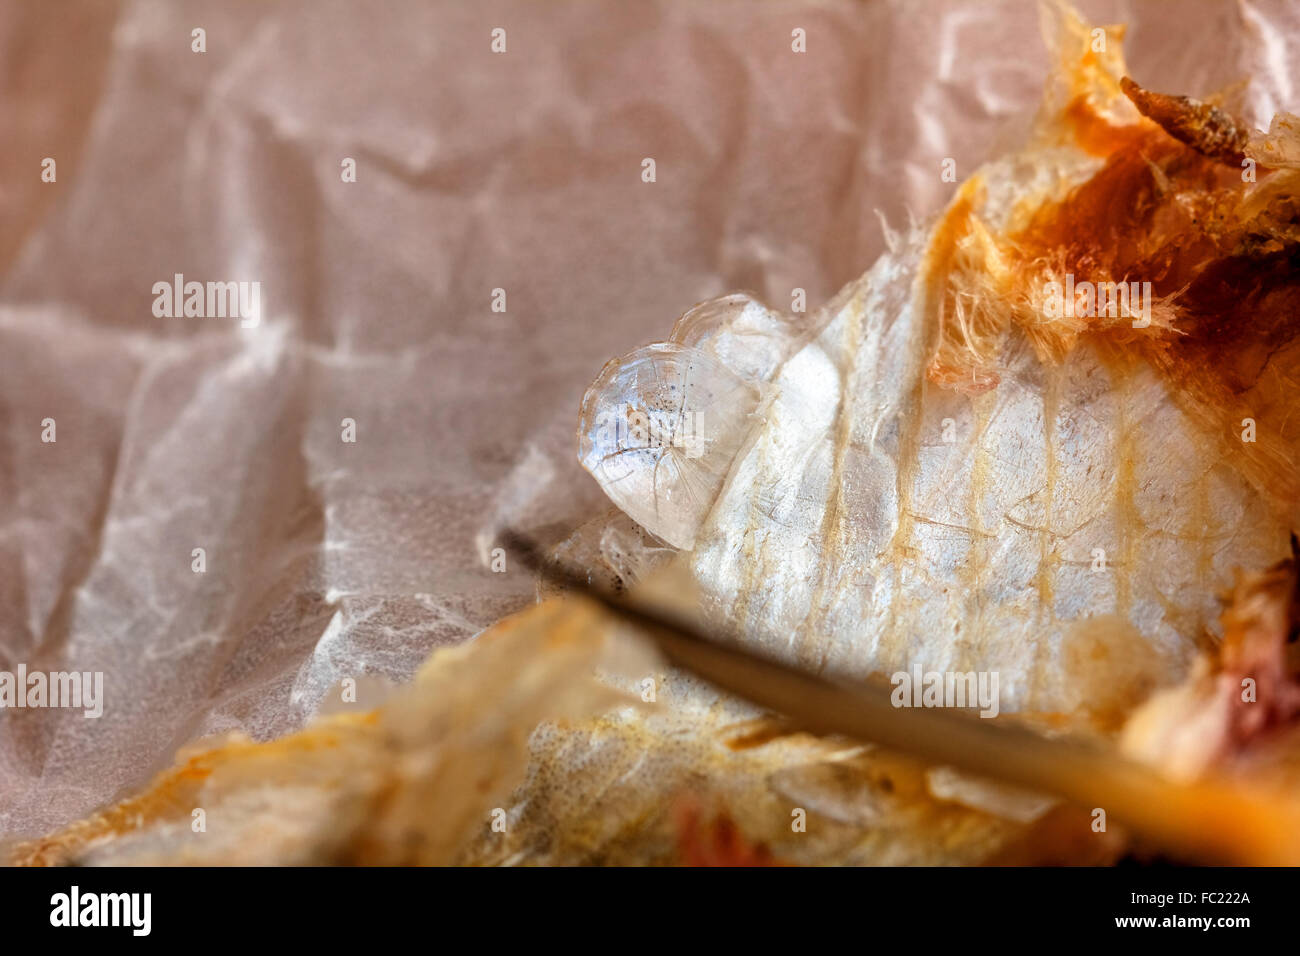 Beauty scales and fish skins for mood Stock Photo